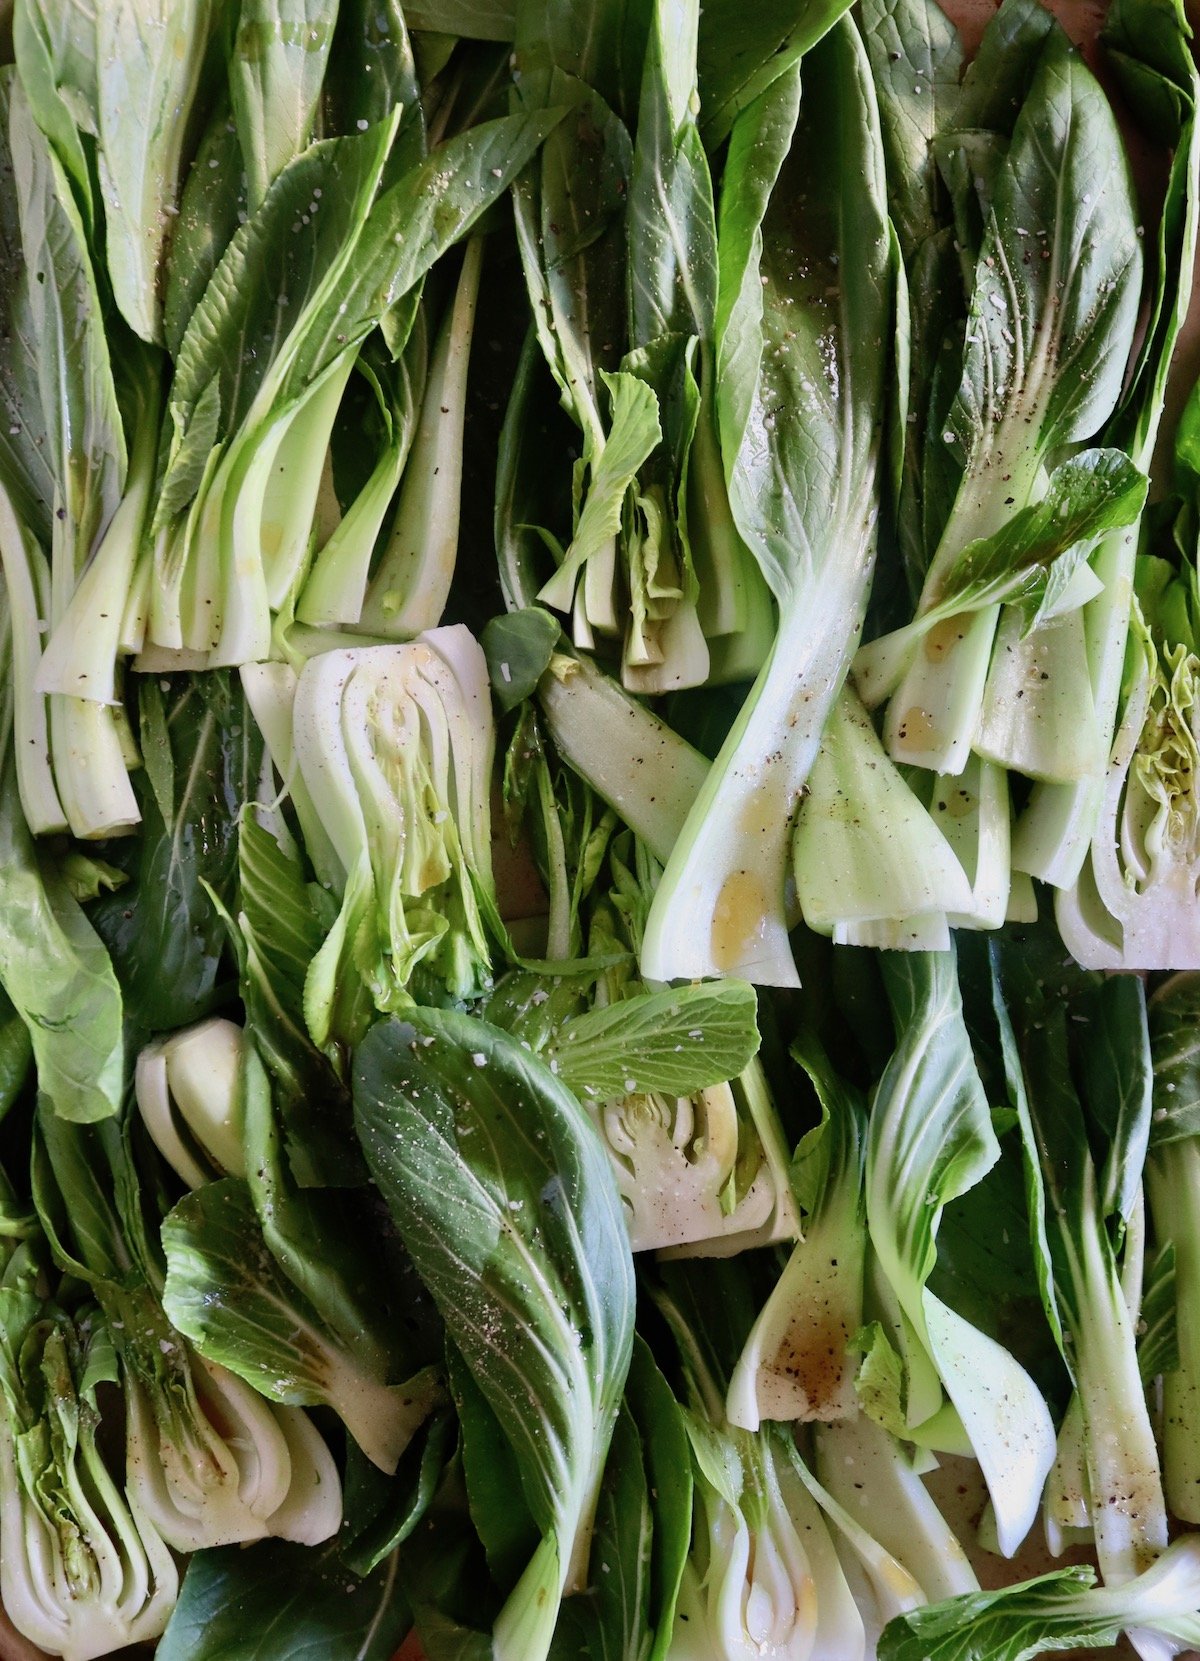 Sheet pan full with baby bok choy sliced in half with oil drizzled over it.